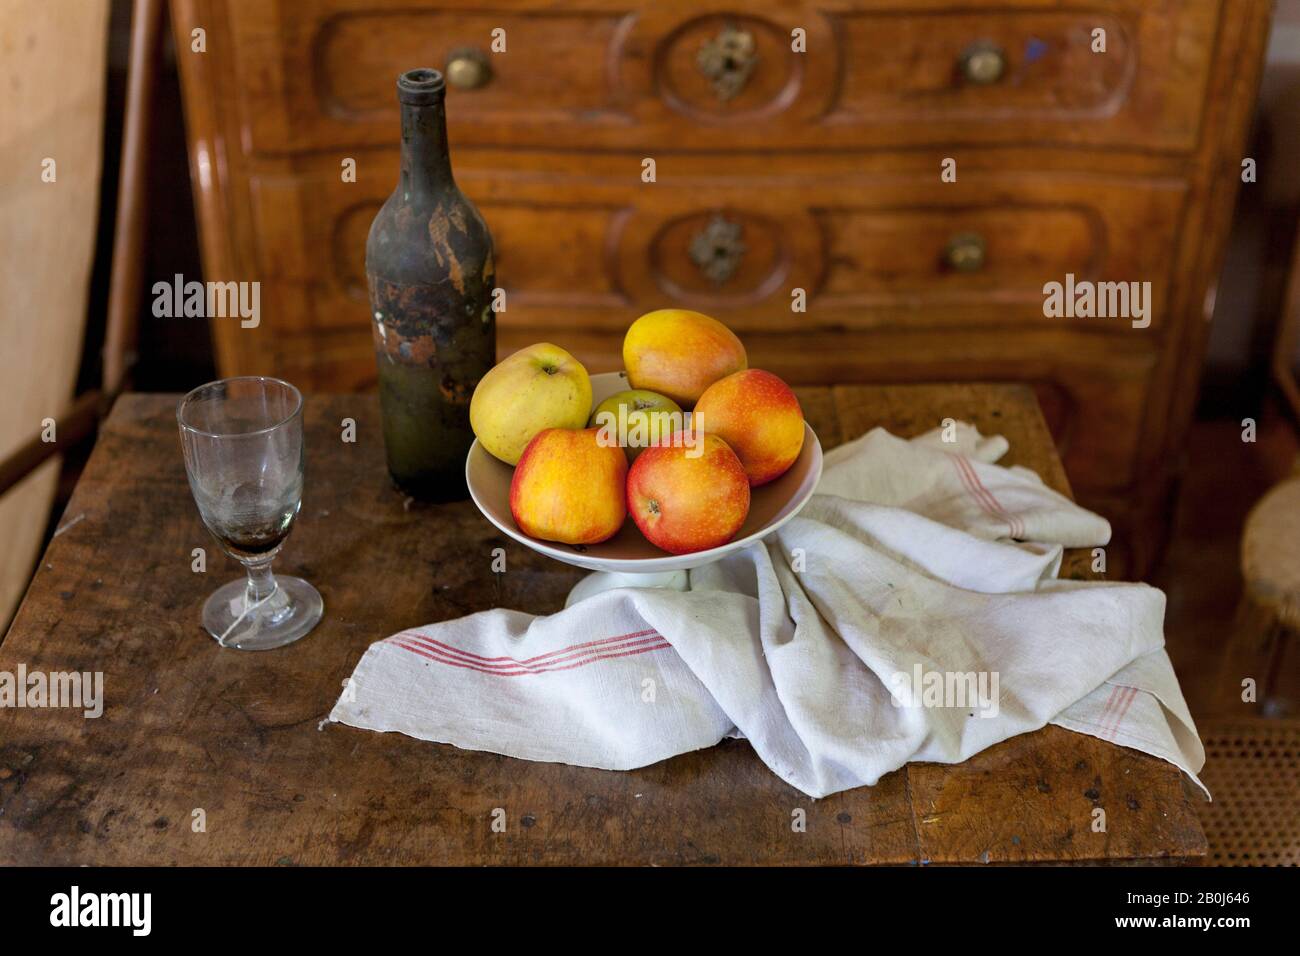 Sill life with apples and wine in Cézanne's stdio in Aix-en-Provence Stock Photo